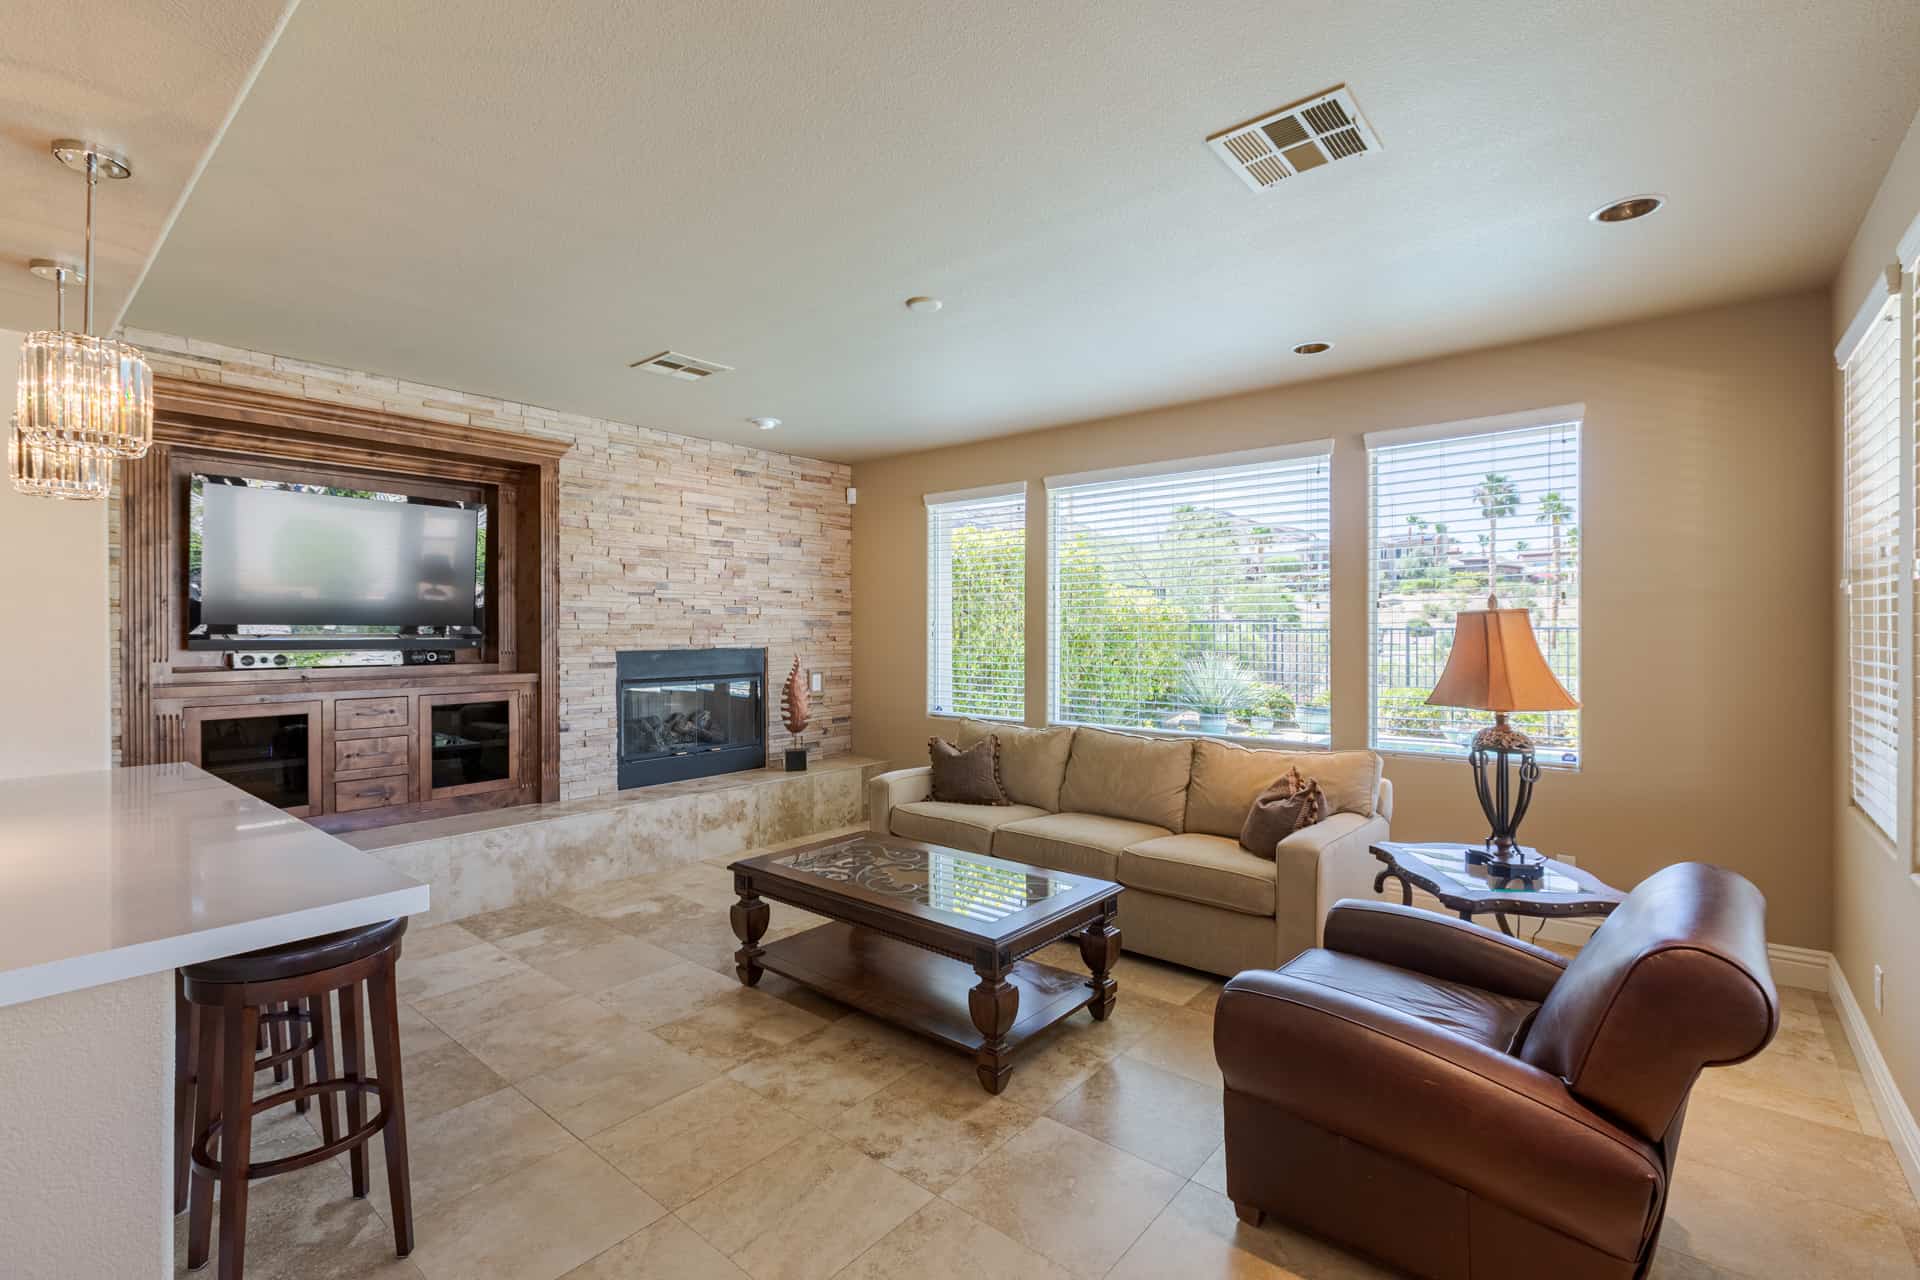 las-vegas-luxry-real-estate-realtor-rob-jensen-company-11434-glowing-sunset-lane-red-rock-country-club32